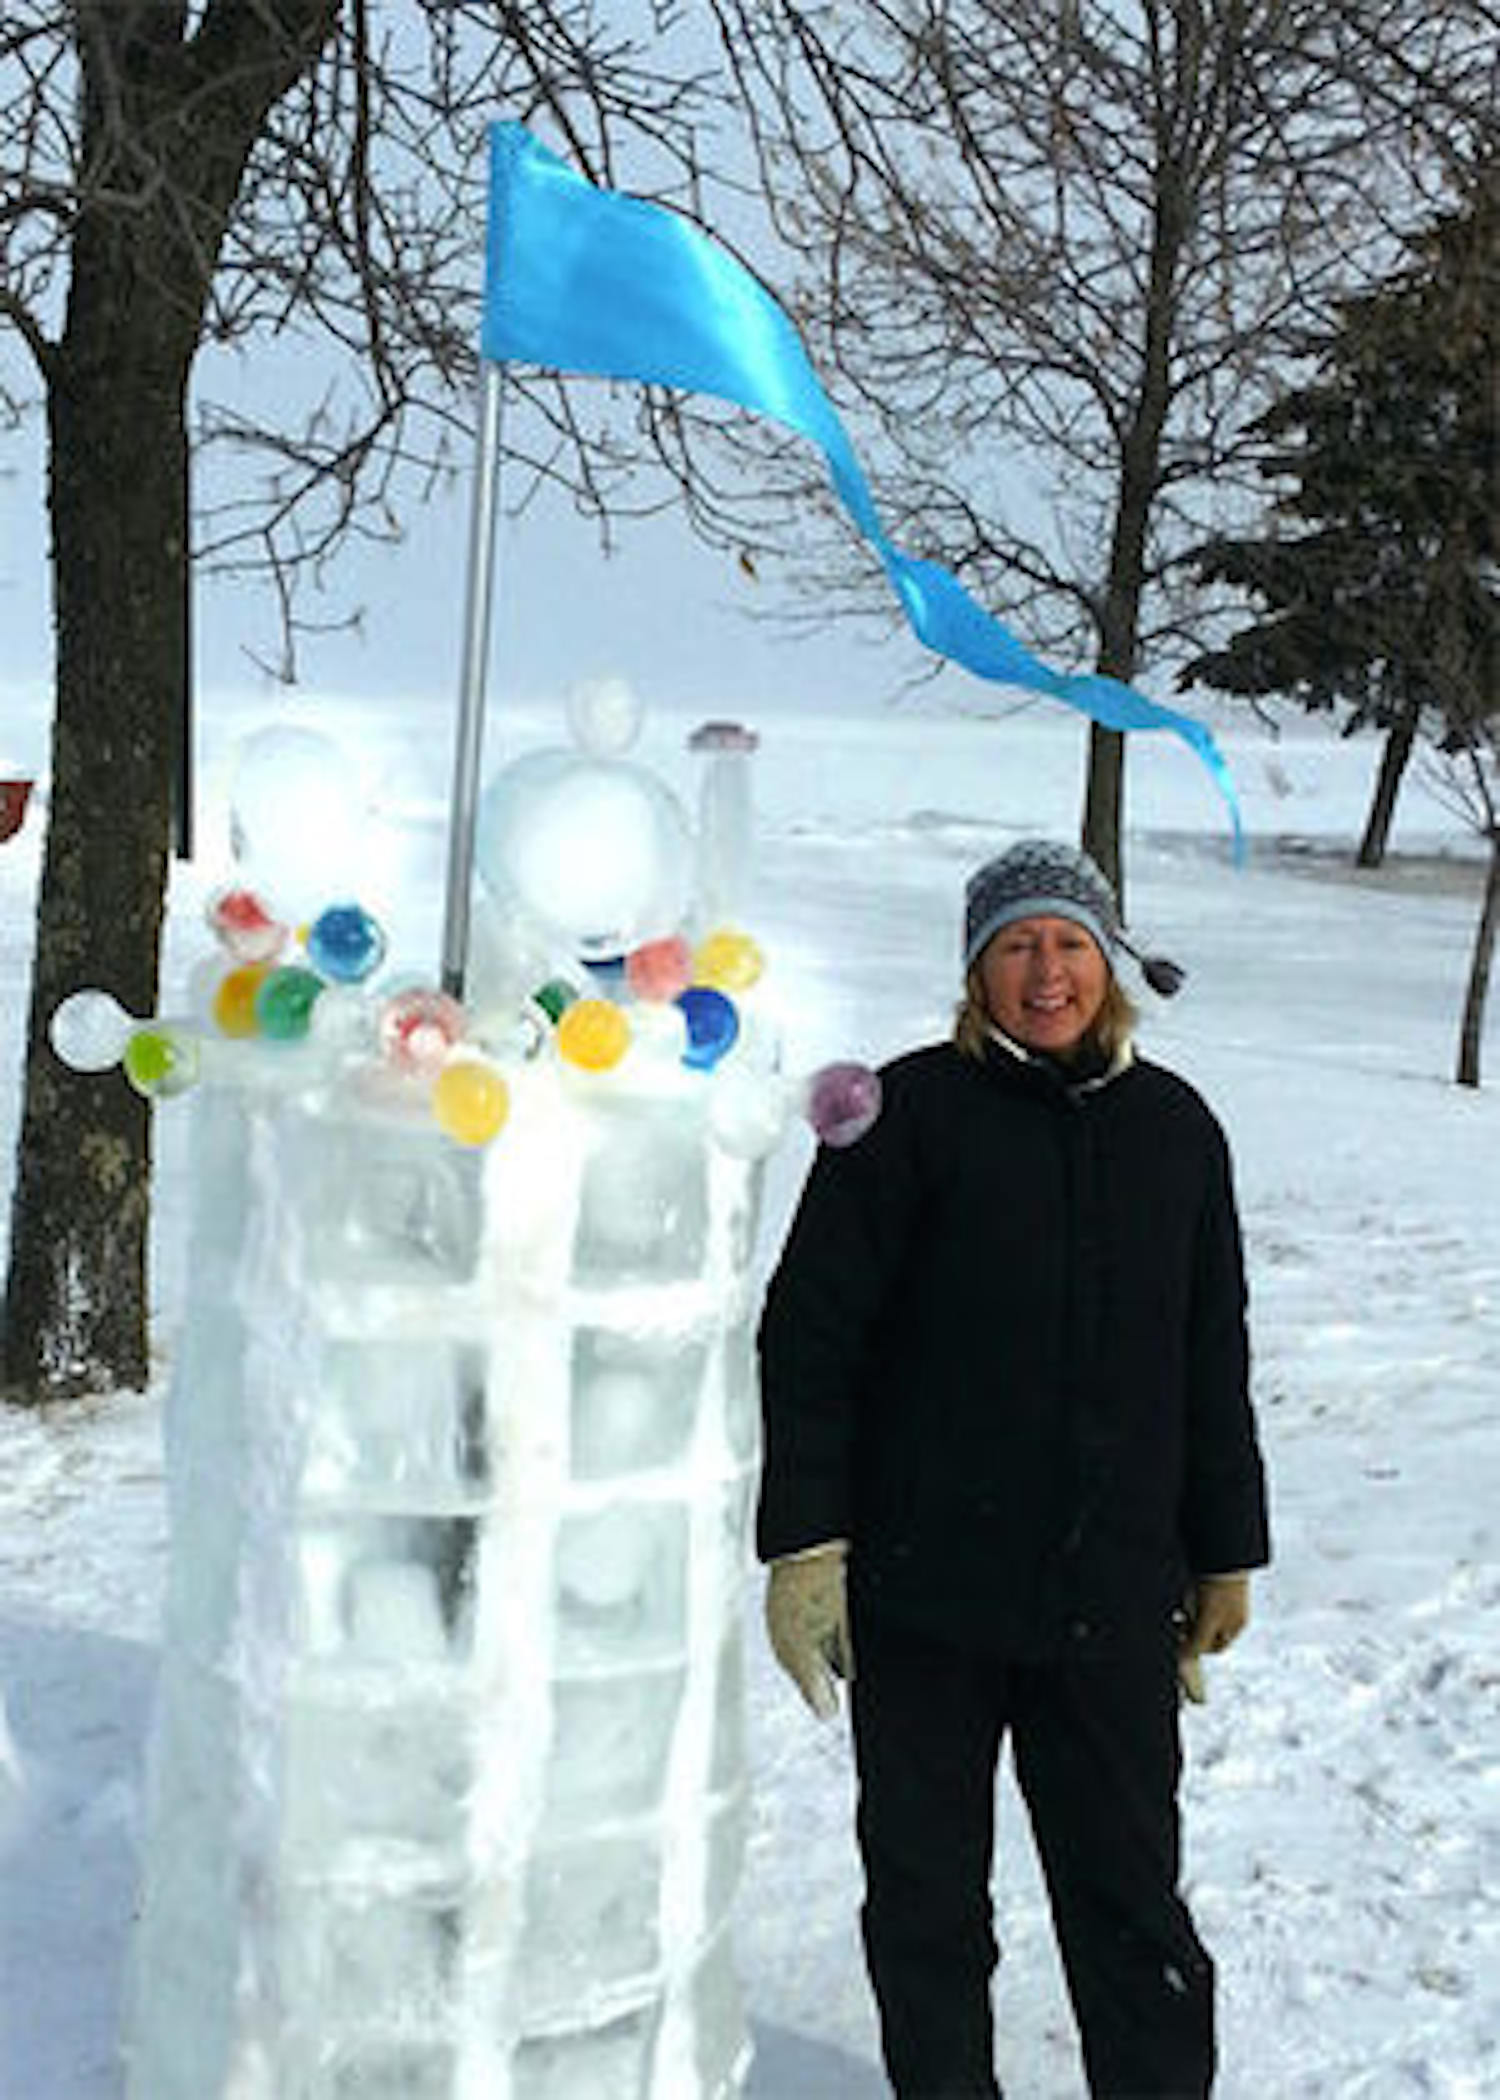  Ice Sculpture for Book Across the Bay. Ashland, Wisconsin, February 2015 